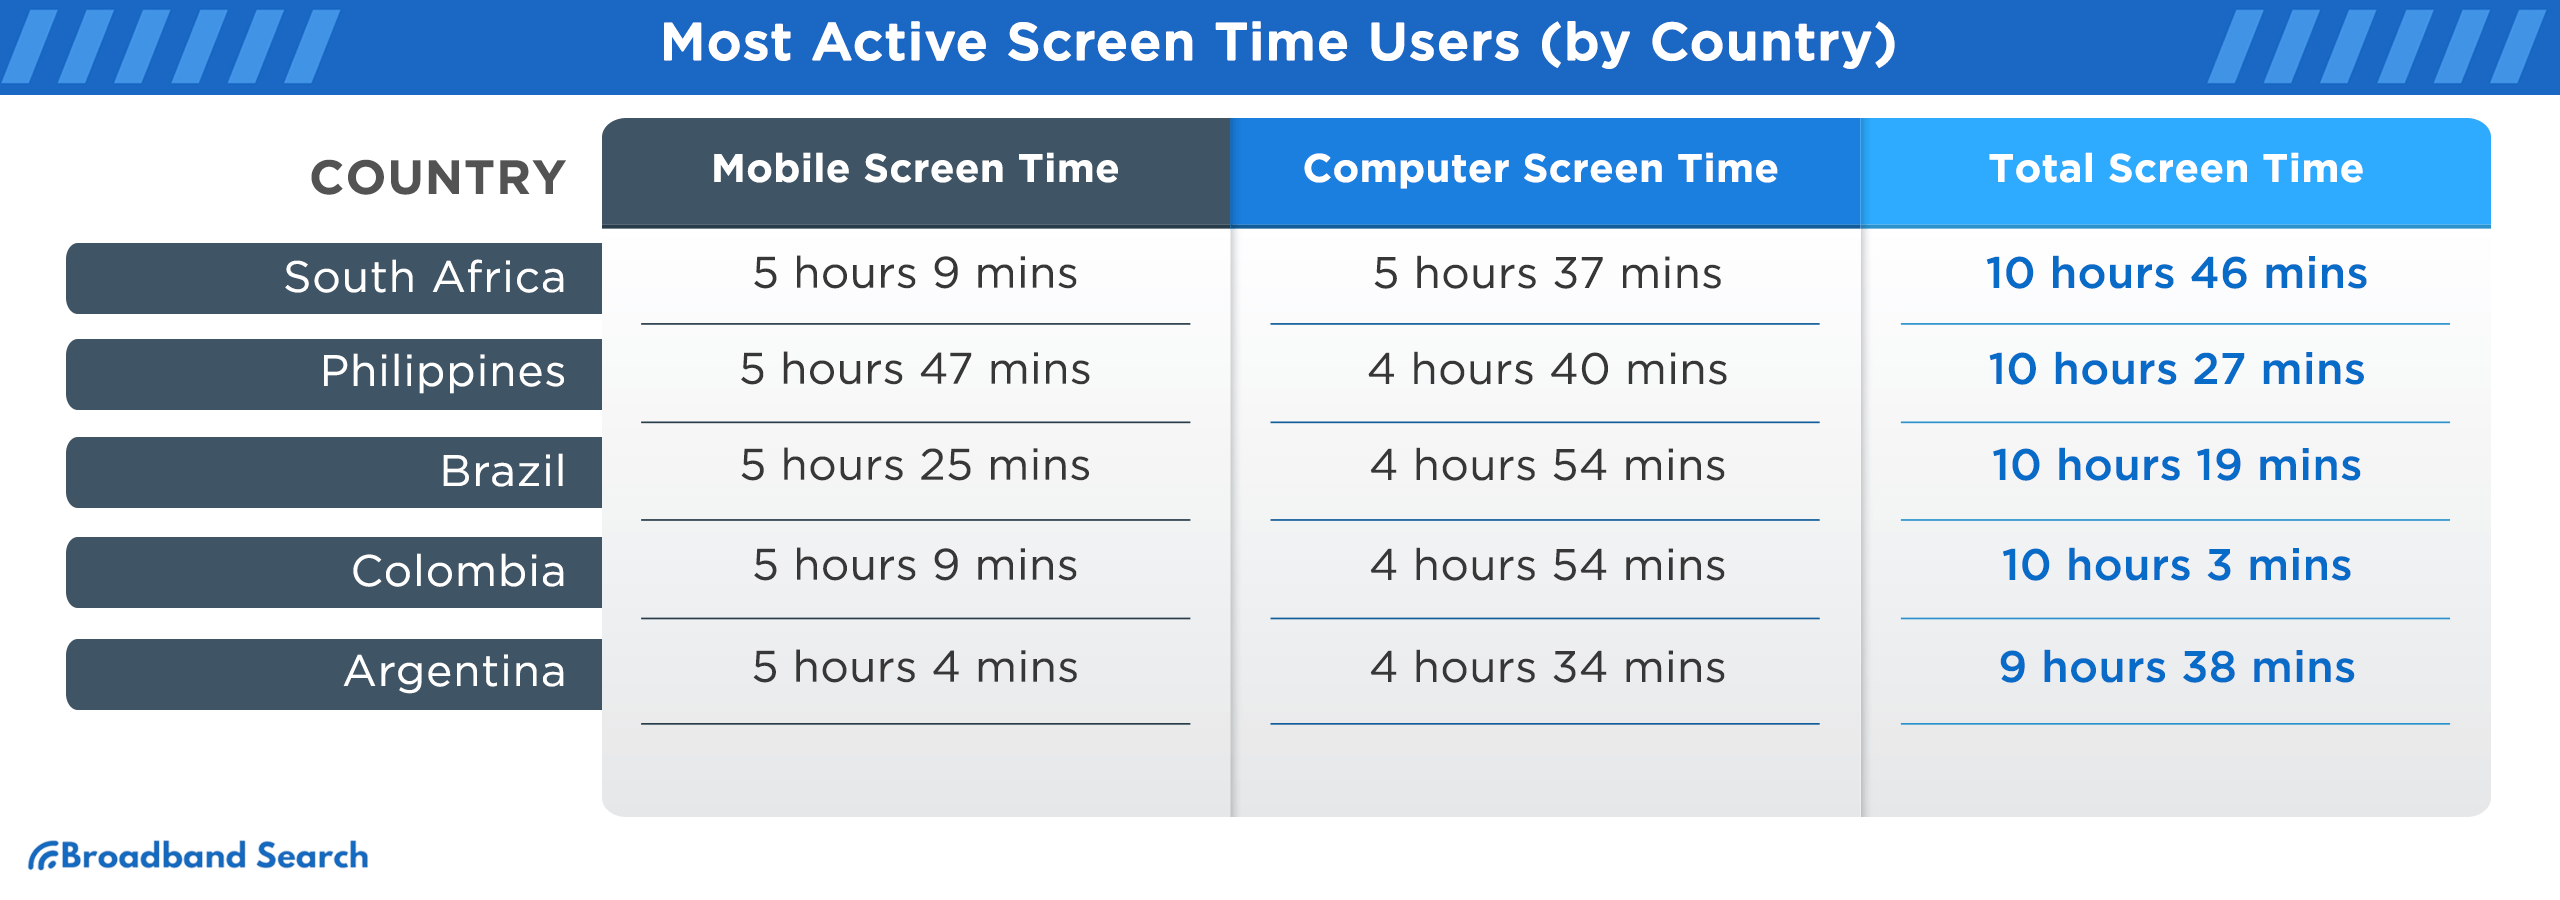 Most active screen time users per country